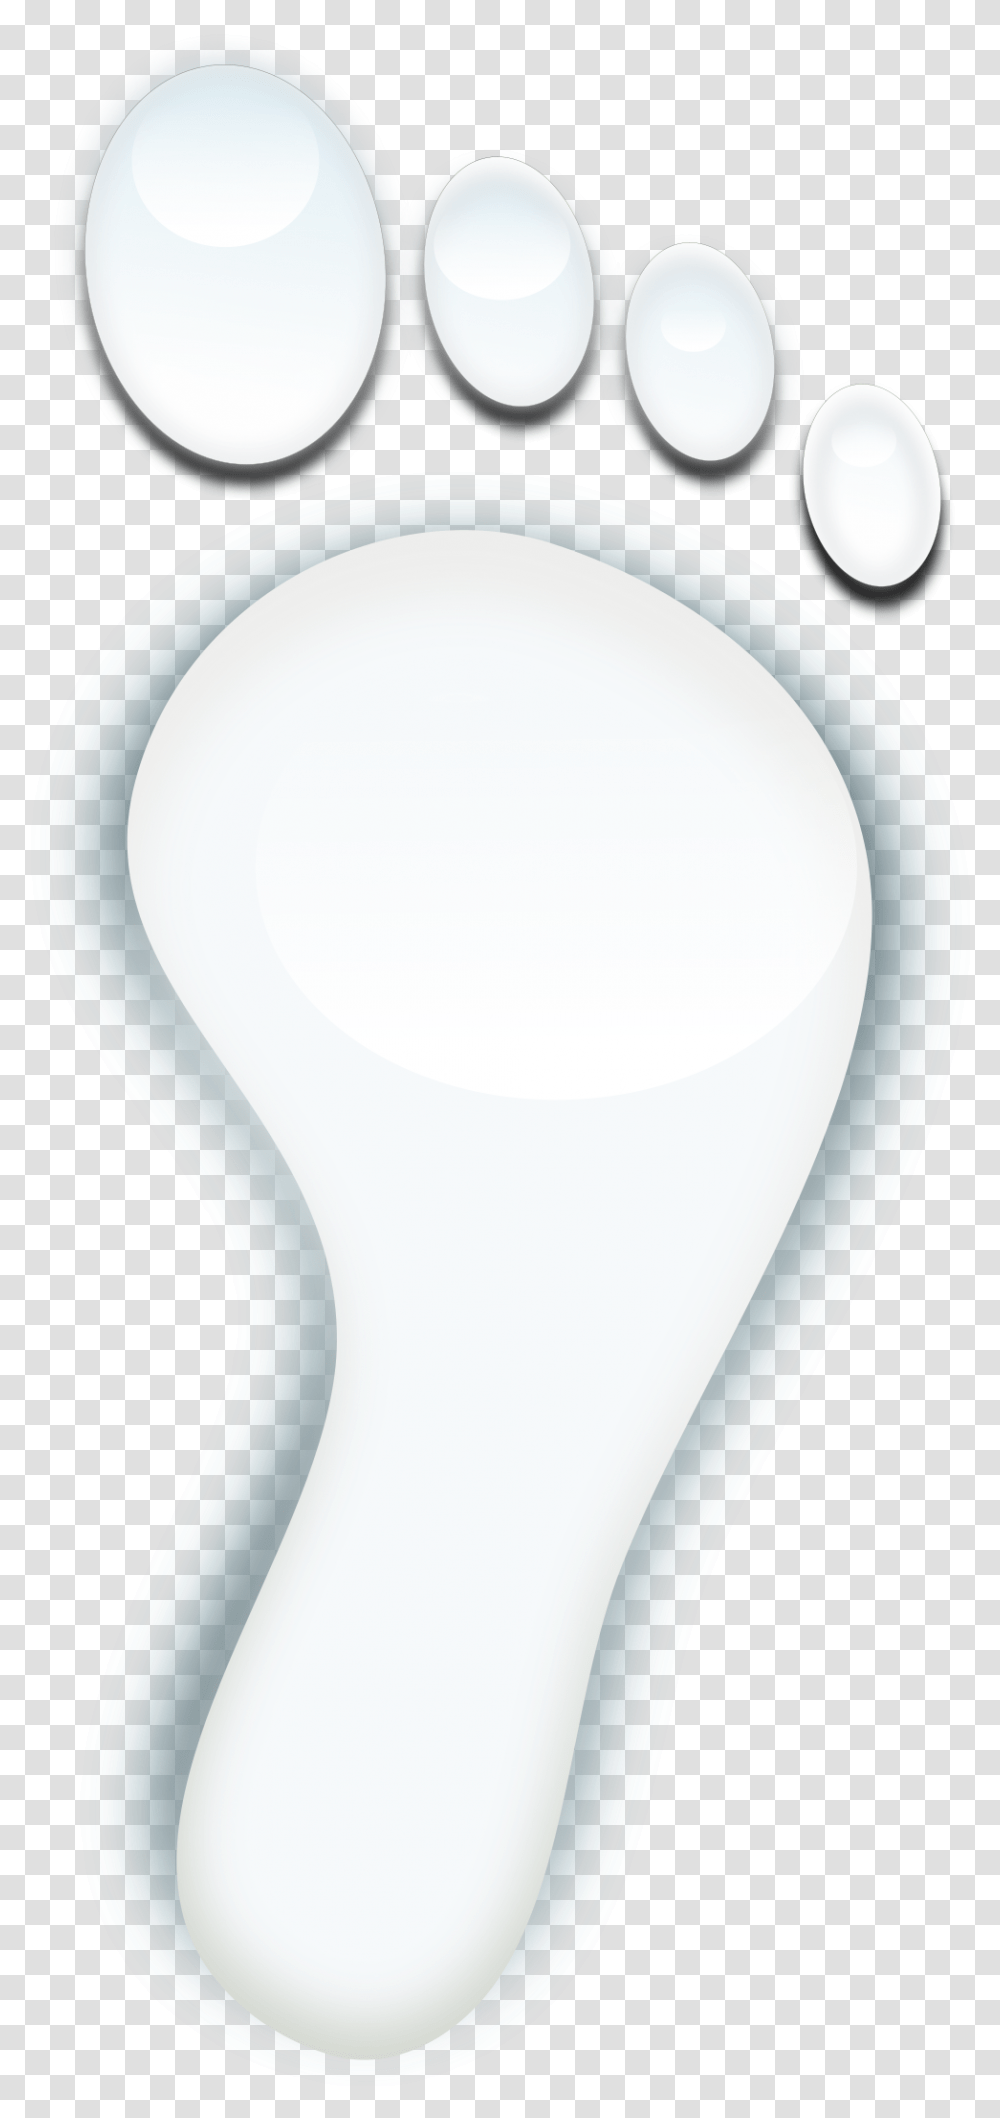 Water Foot Print Clip Arts Foot Icon White, Light, Lightbulb Transparent Png